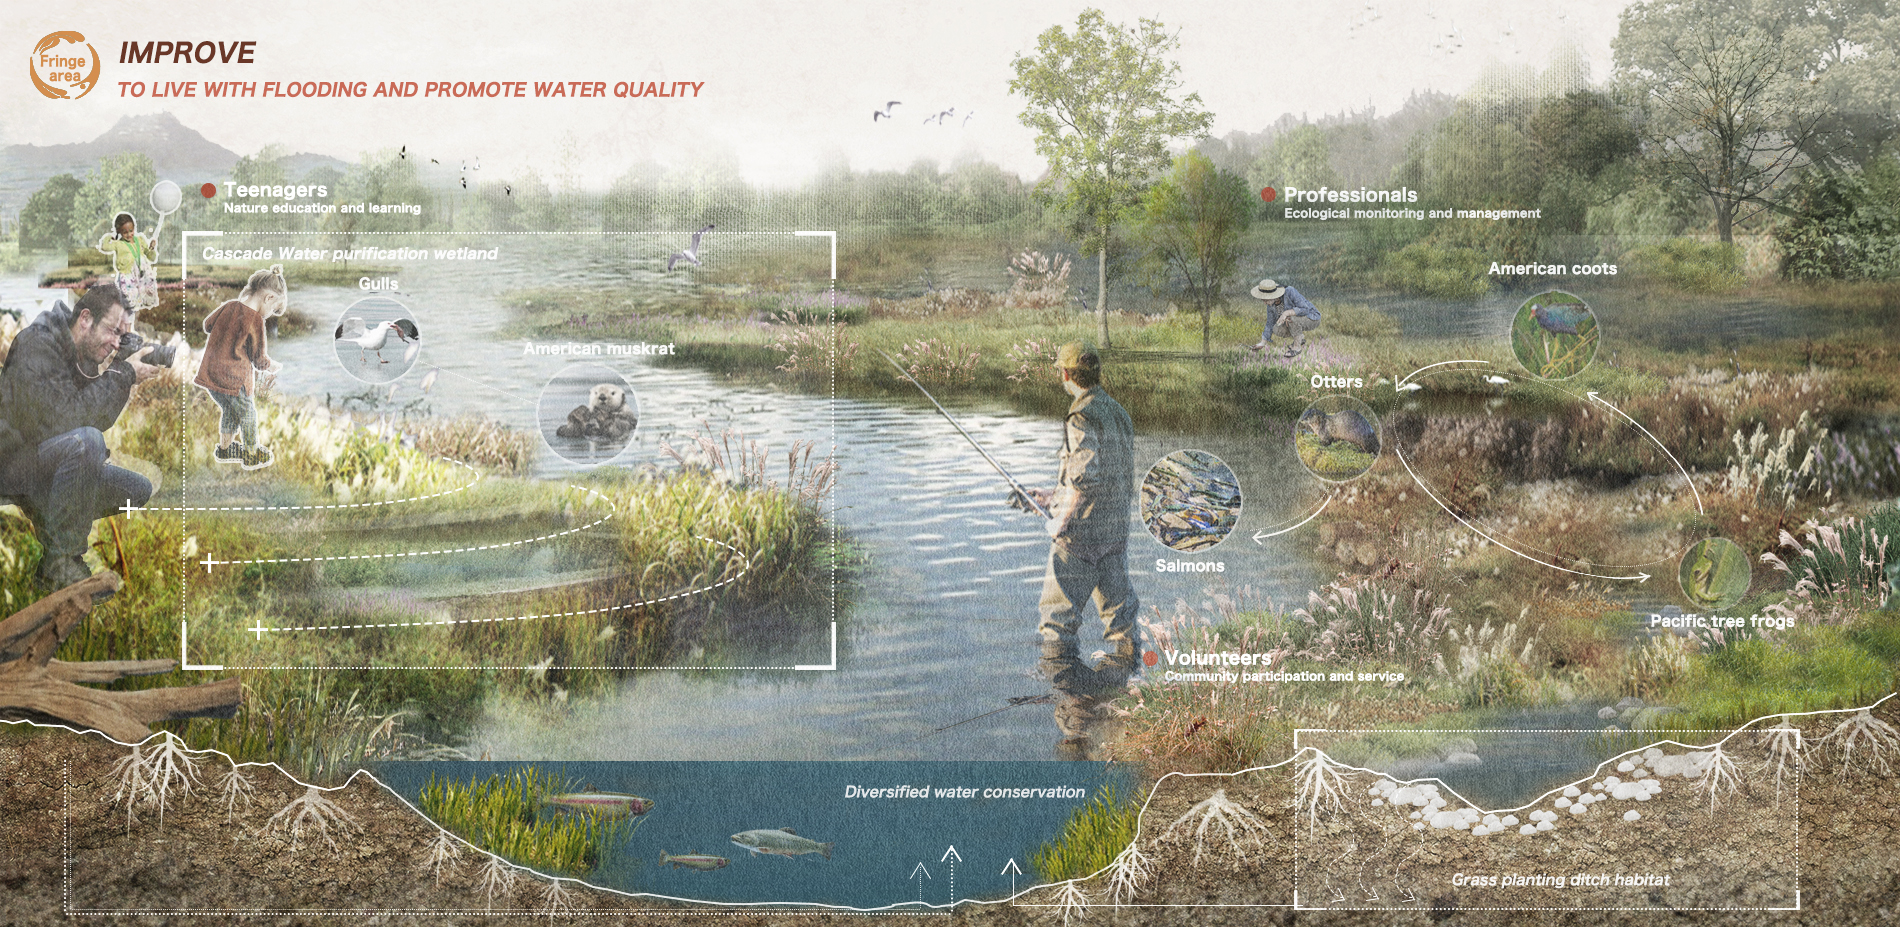 IMPROVE: TO LIVE WITH FLOODING AND PROMOTE WATER QUALITY